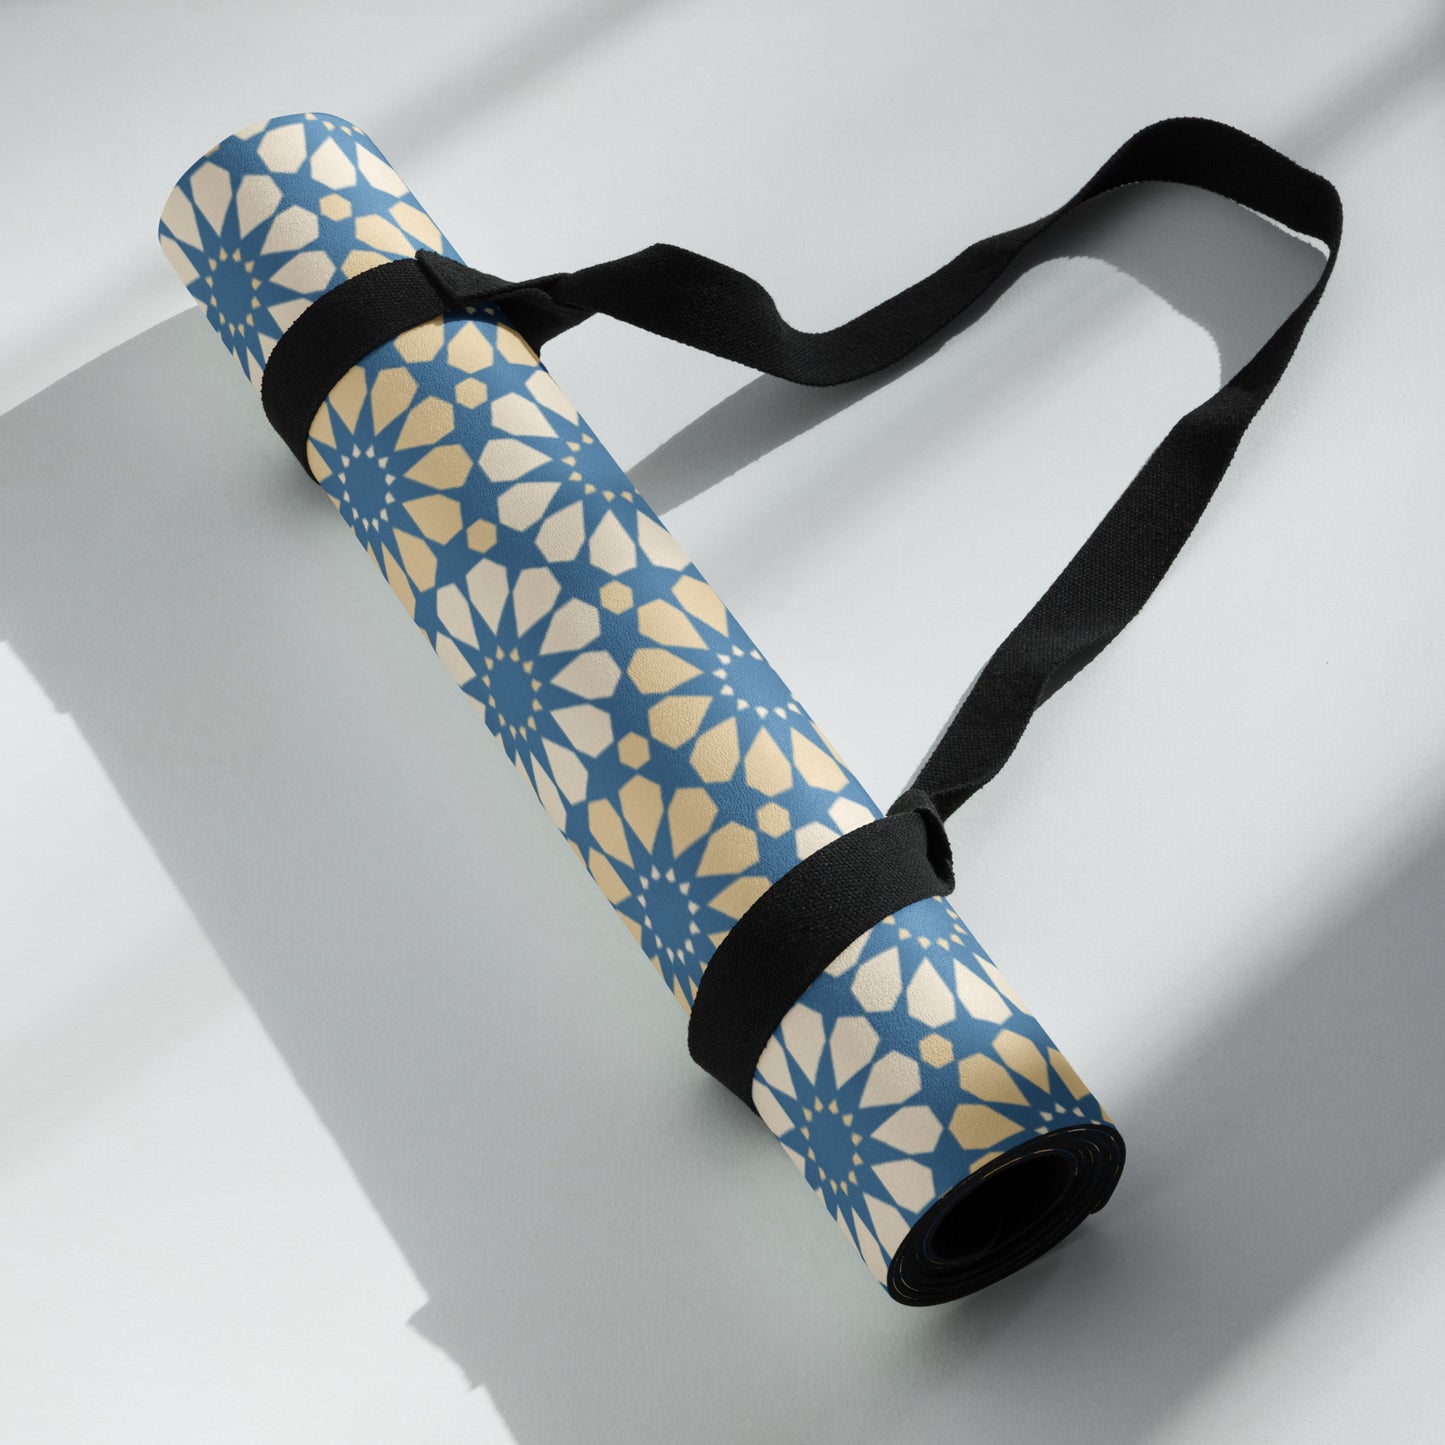 Yoga mat perfect for exercising, stretching or meditating. Anti-slip rubber on the bottom. Sunflower Collection